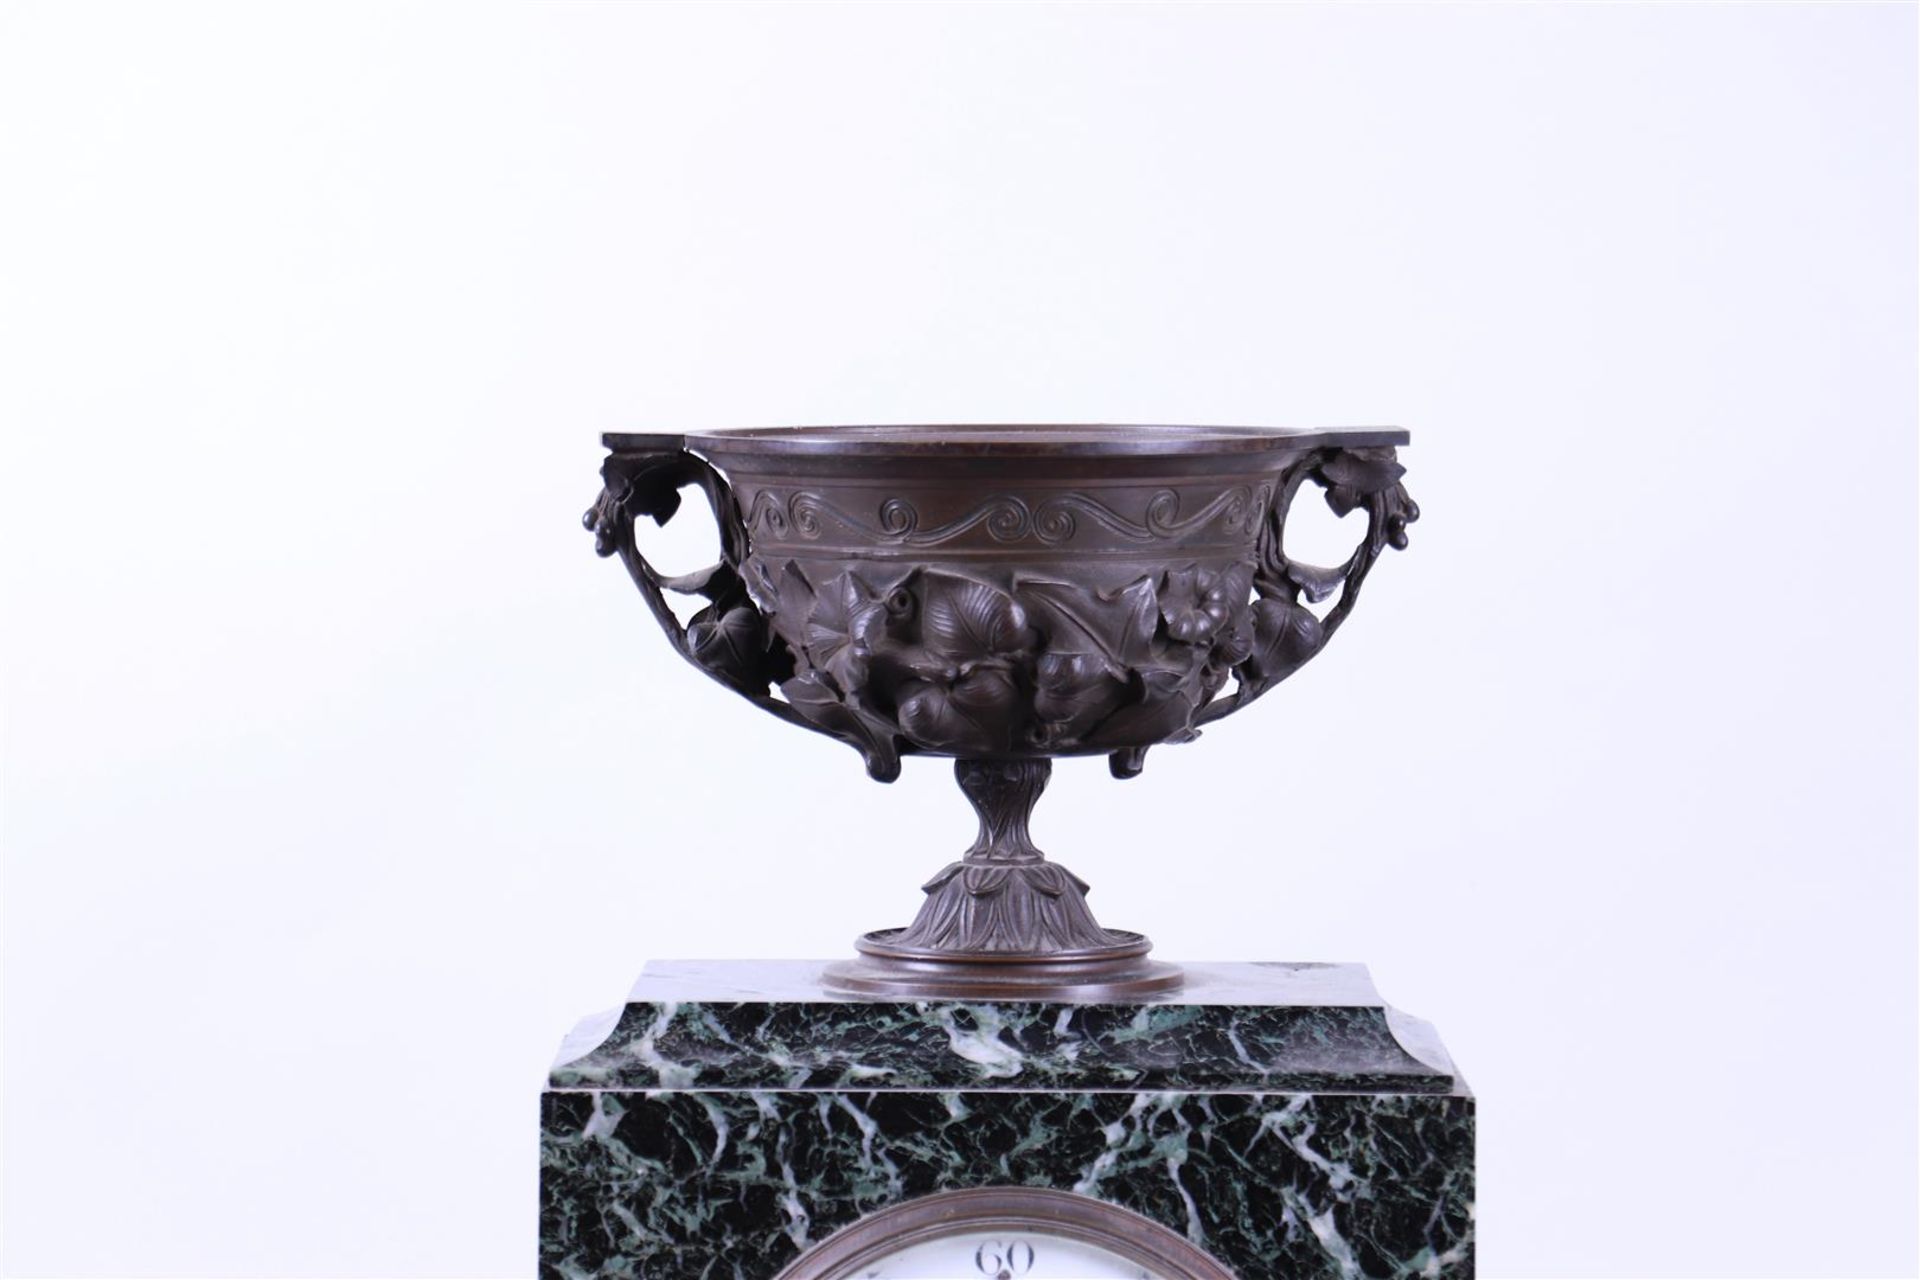 Marble Mantel Clock with a Bronze Chestnut Vase on Top (Ca. 1900) - Image 3 of 3